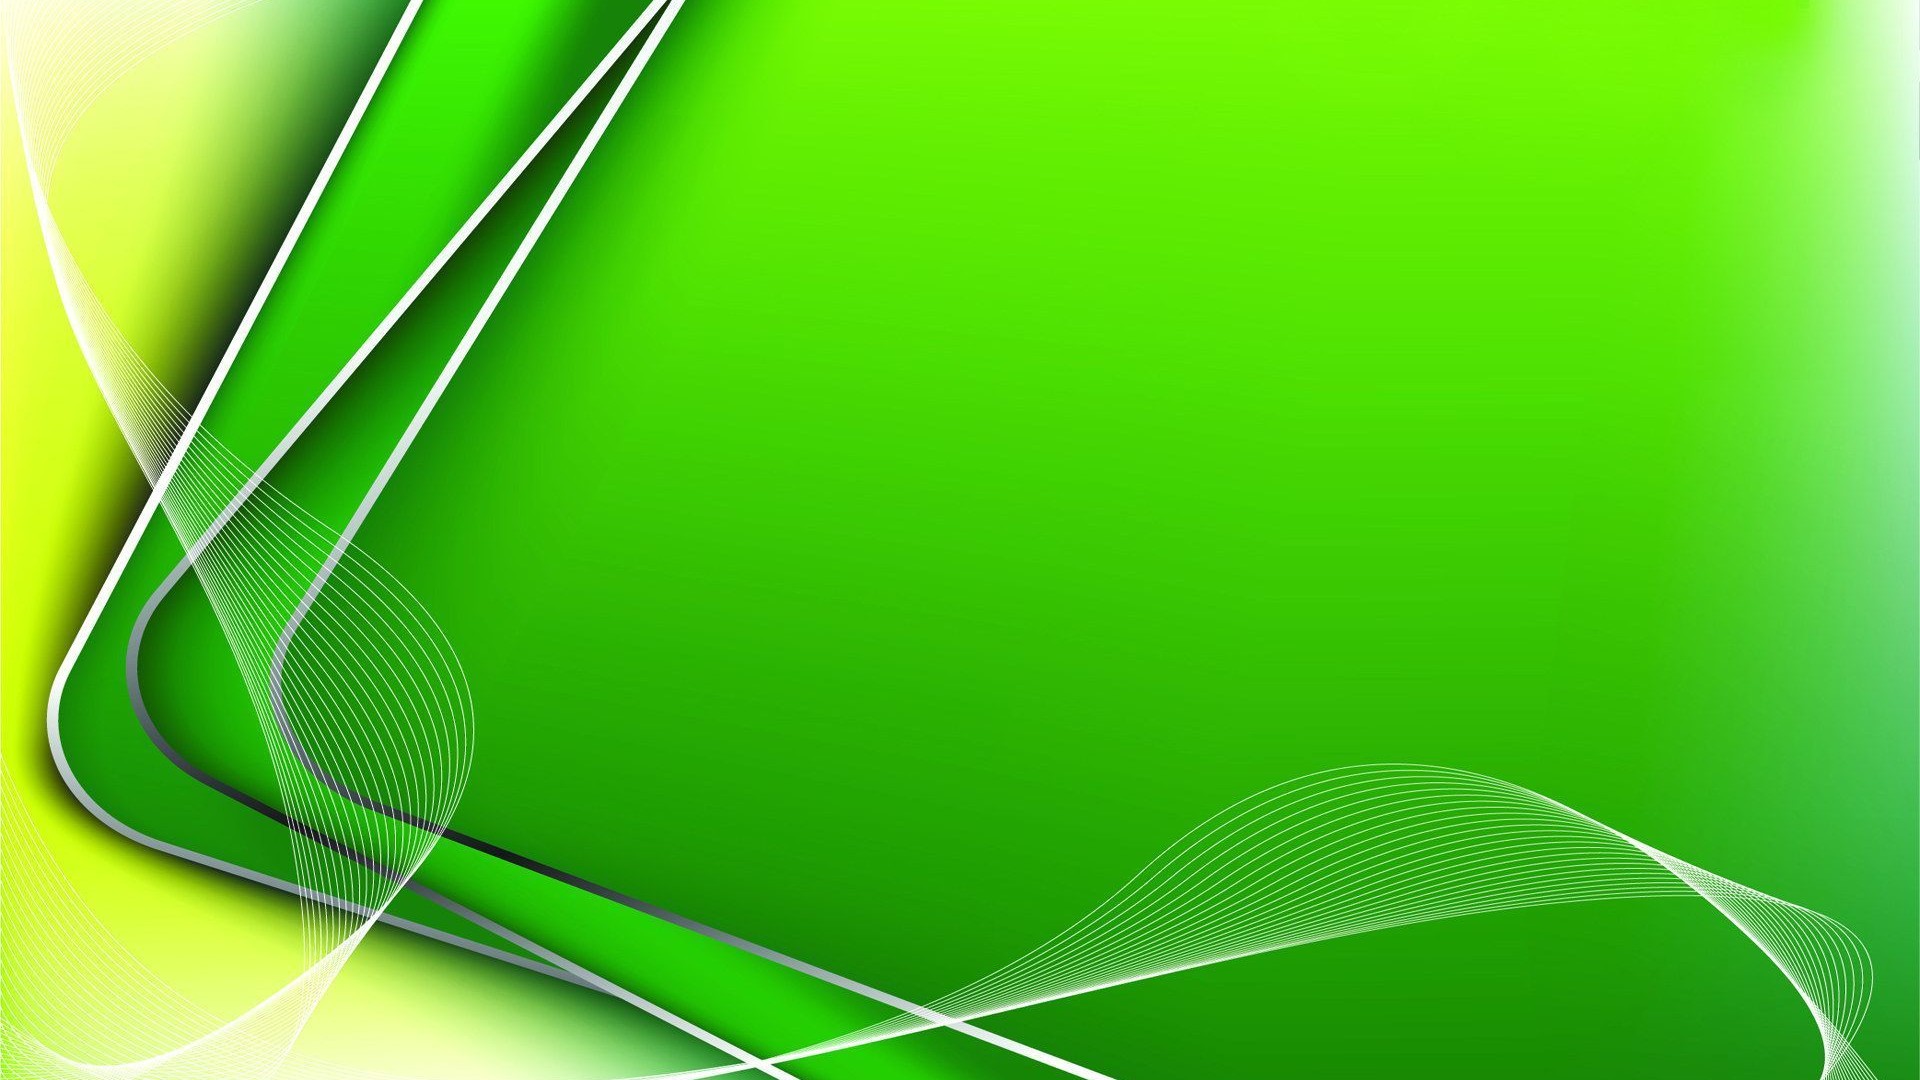 Lime Green HD Backgrounds With Resolution 1920X1080 pixel. You can make this wallpaper for your Desktop Computer Backgrounds, Mac Wallpapers, Android Lock screen or iPhone Screensavers